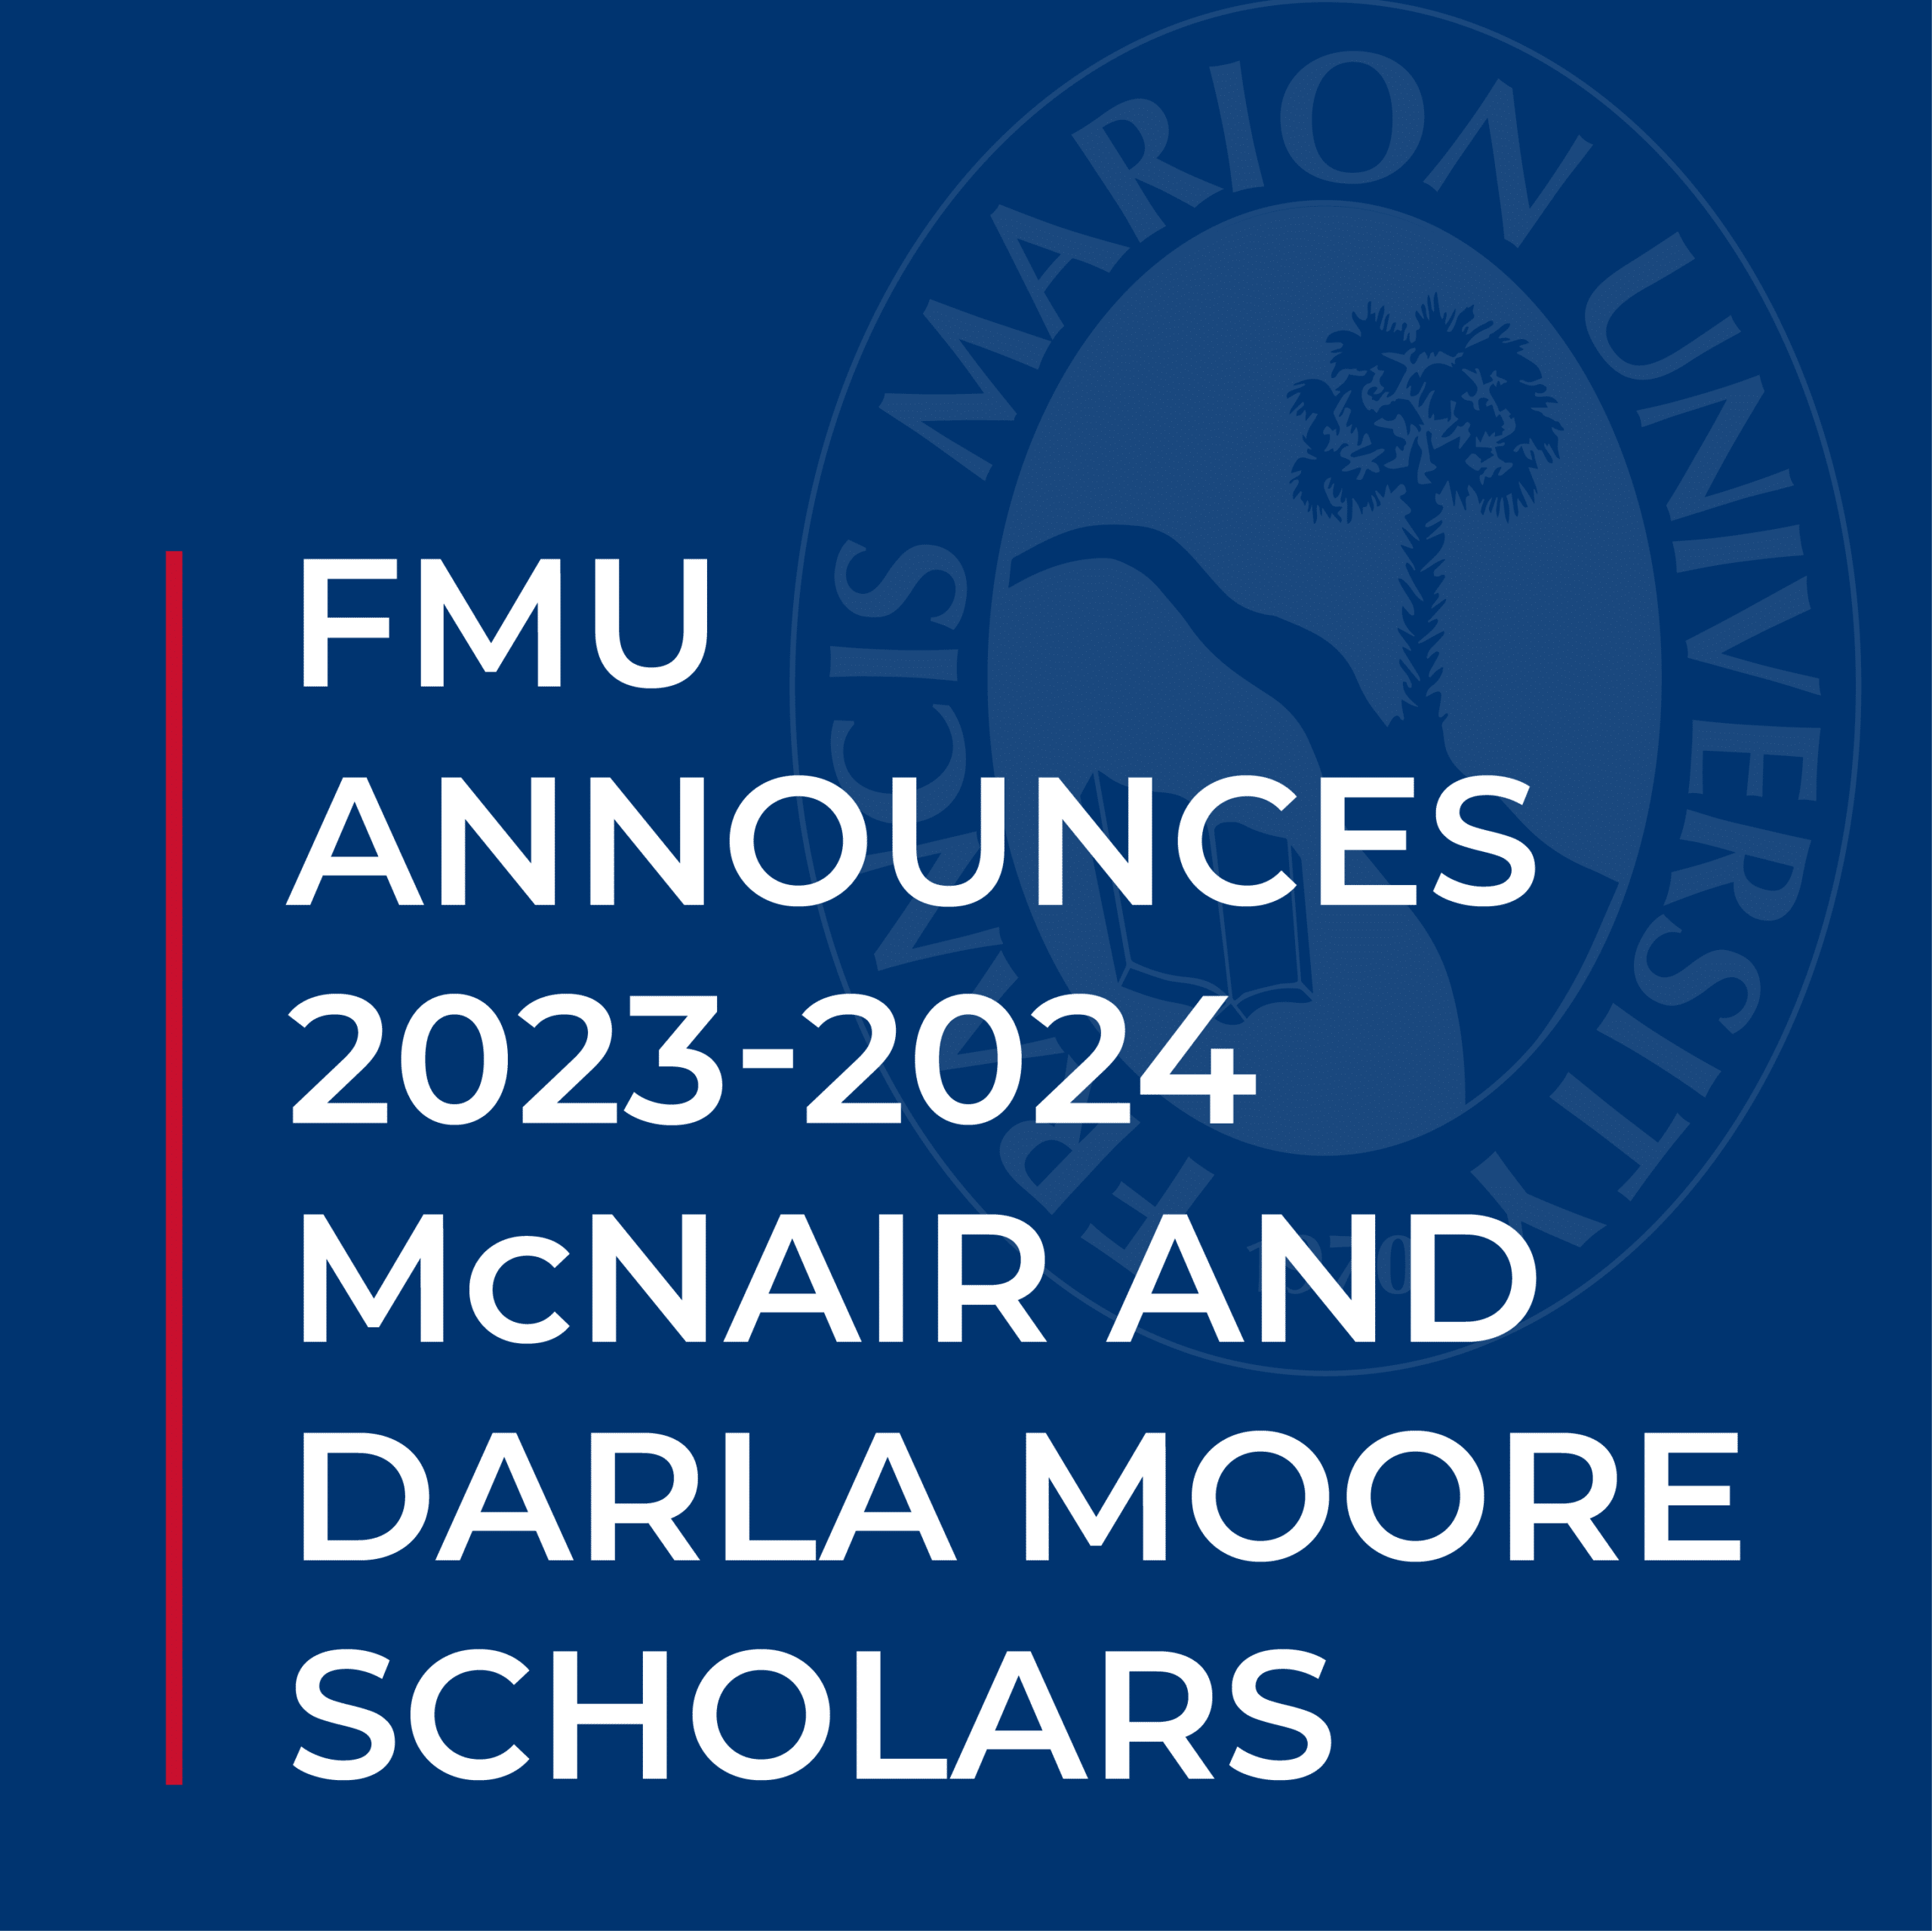 FMU announces McNair and Darla Moore Scholars for the 2023-2024 school year